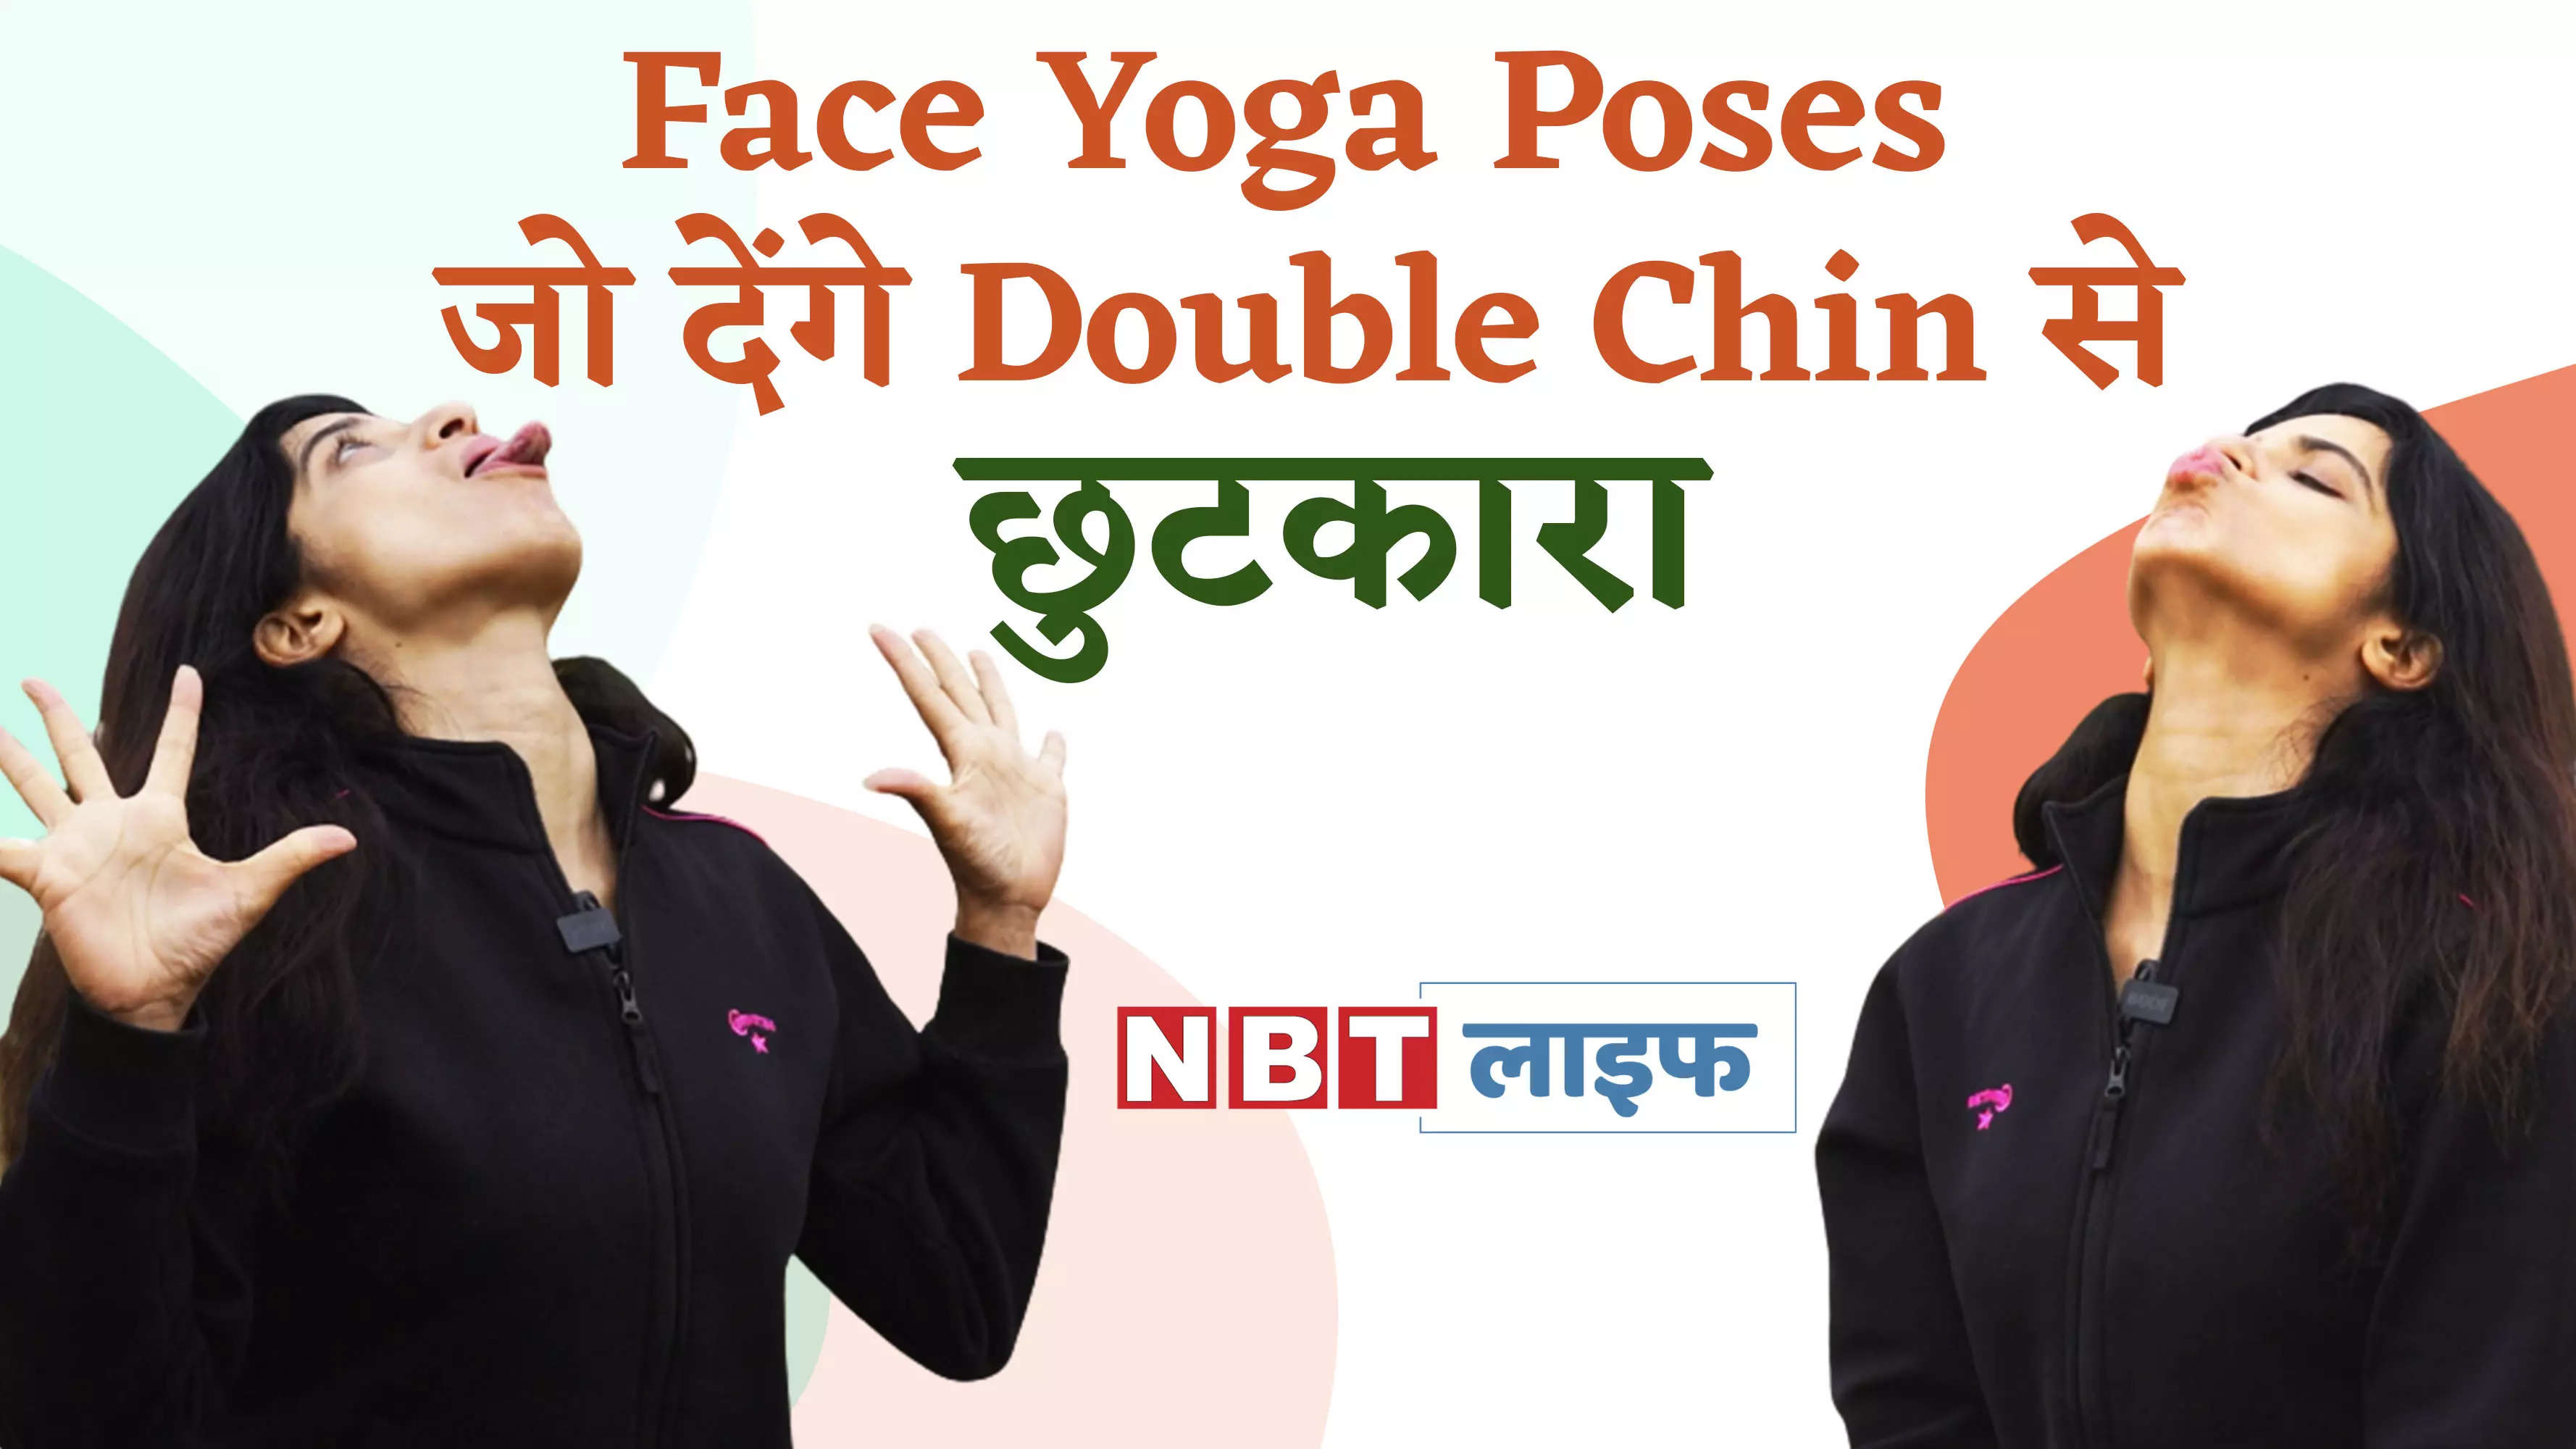 Hate double chin? Get rid with these yoga poses 𝓝𝓮𝓮𝓵𝓴𝓪𝓷𝓽𝓱  𝓼𝓹𝓸𝓻𝓽𝓼 𝓬𝓸𝓶𝓹𝓵𝓮�... | Instagram